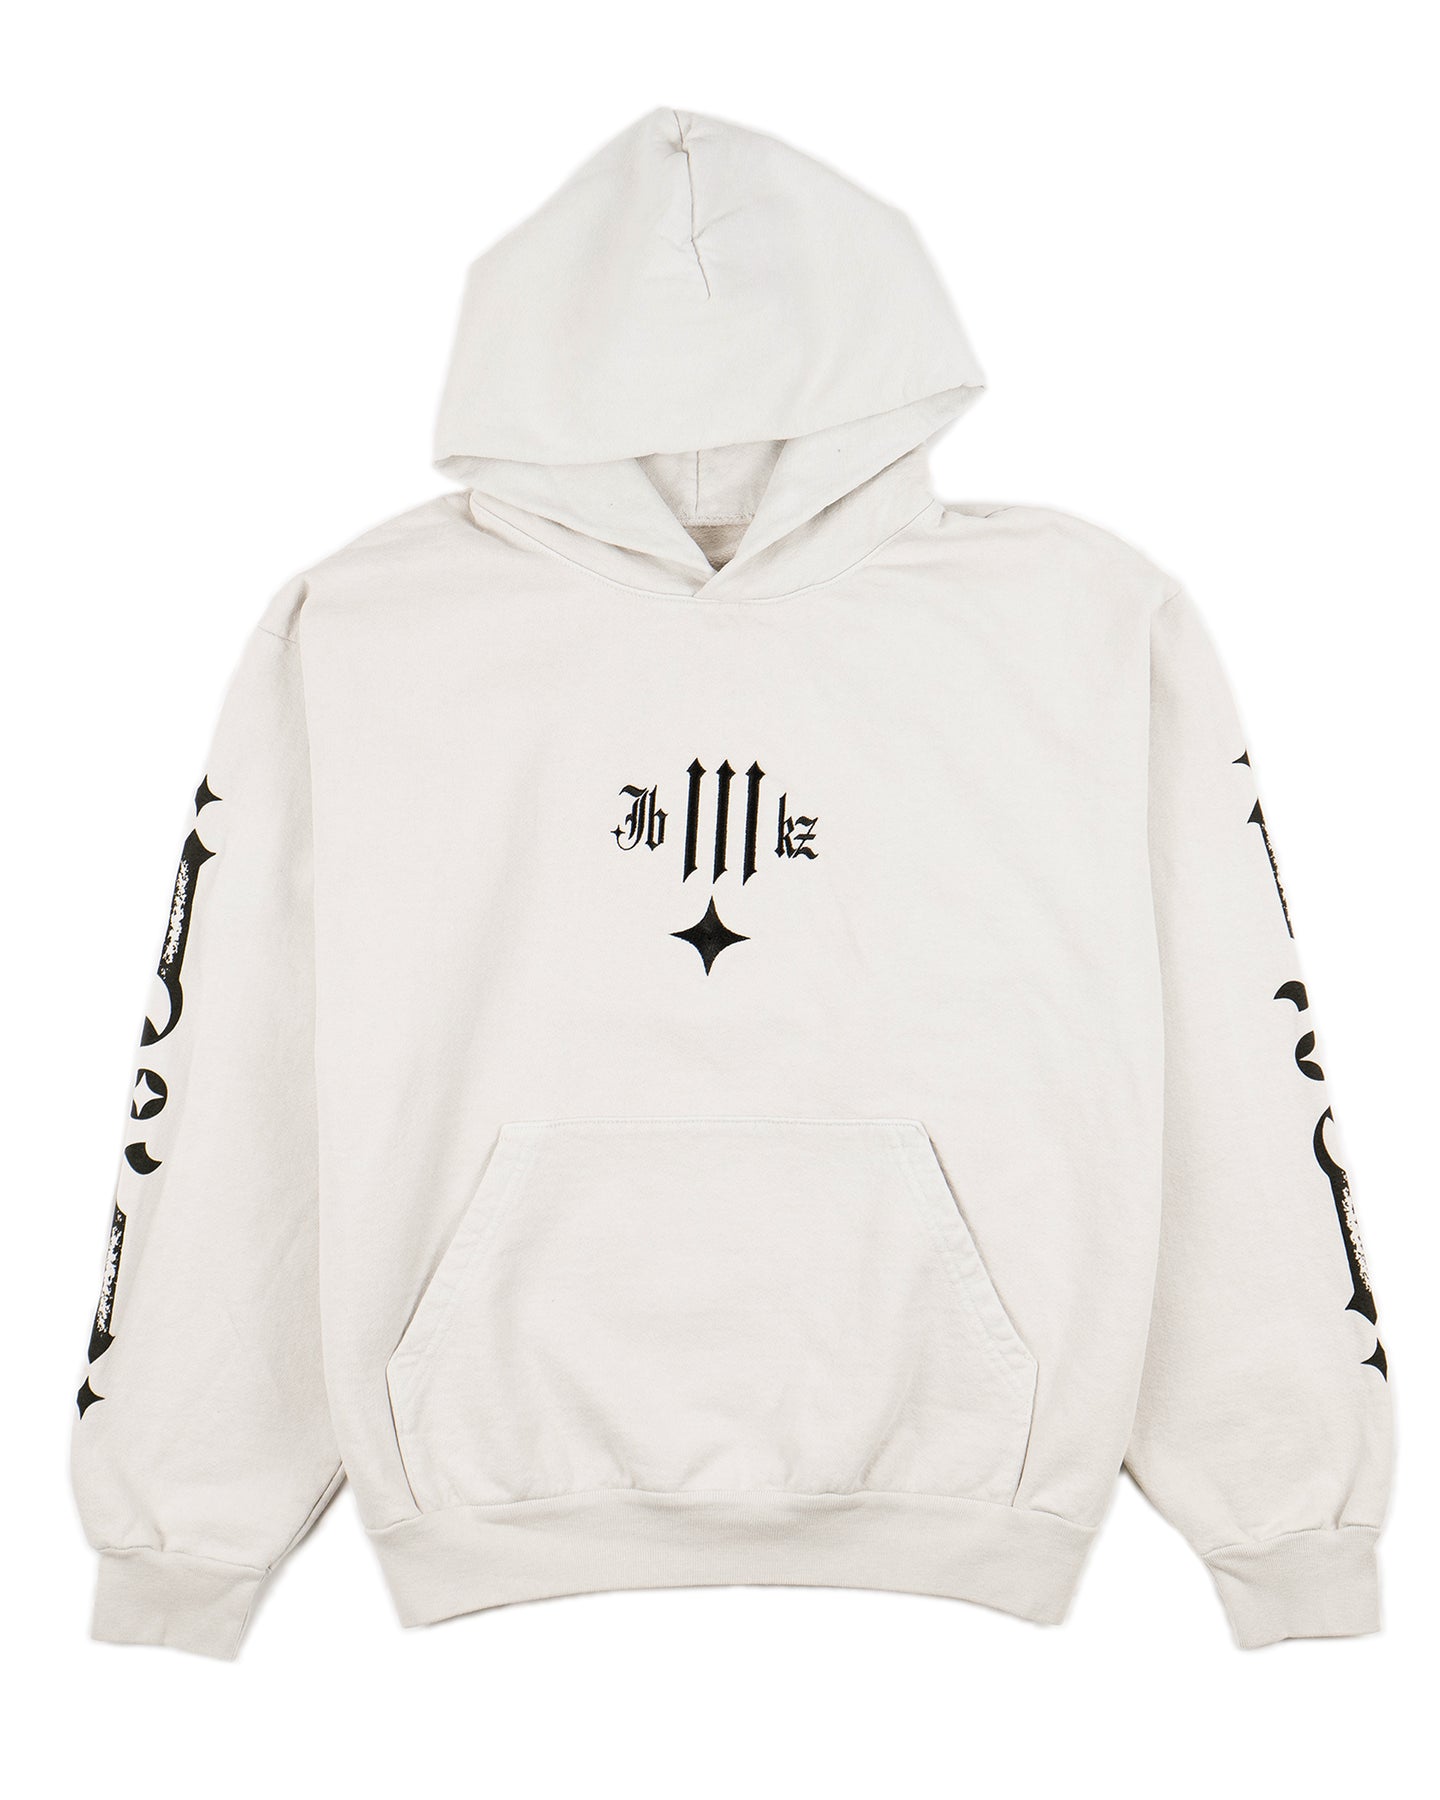 Subculture OLD ENGLISH HOODIE | hmgrocerant.com